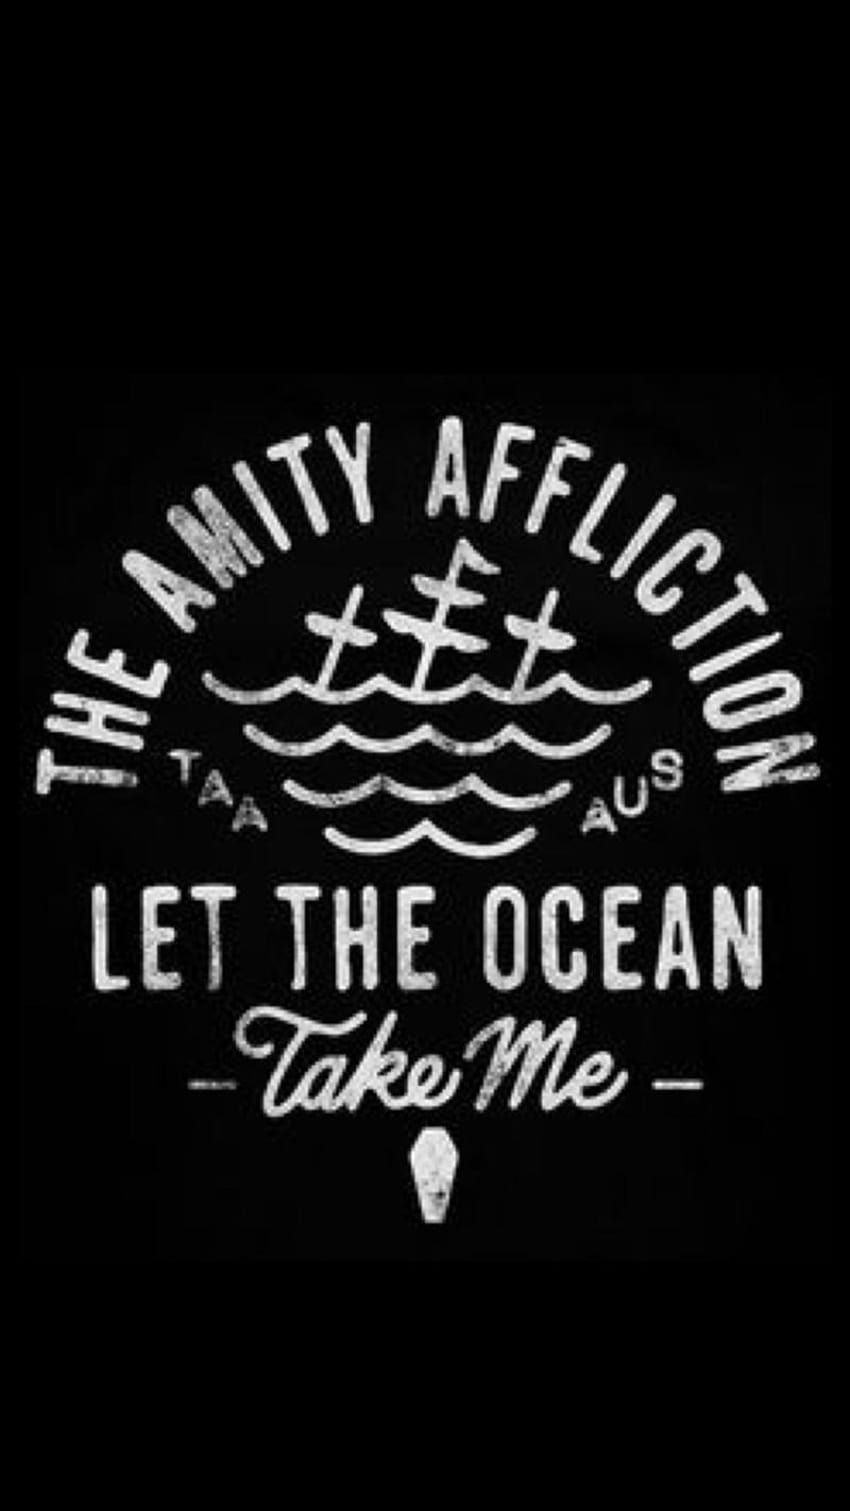 The amity affliction to your cell phone HD phone wallpaper